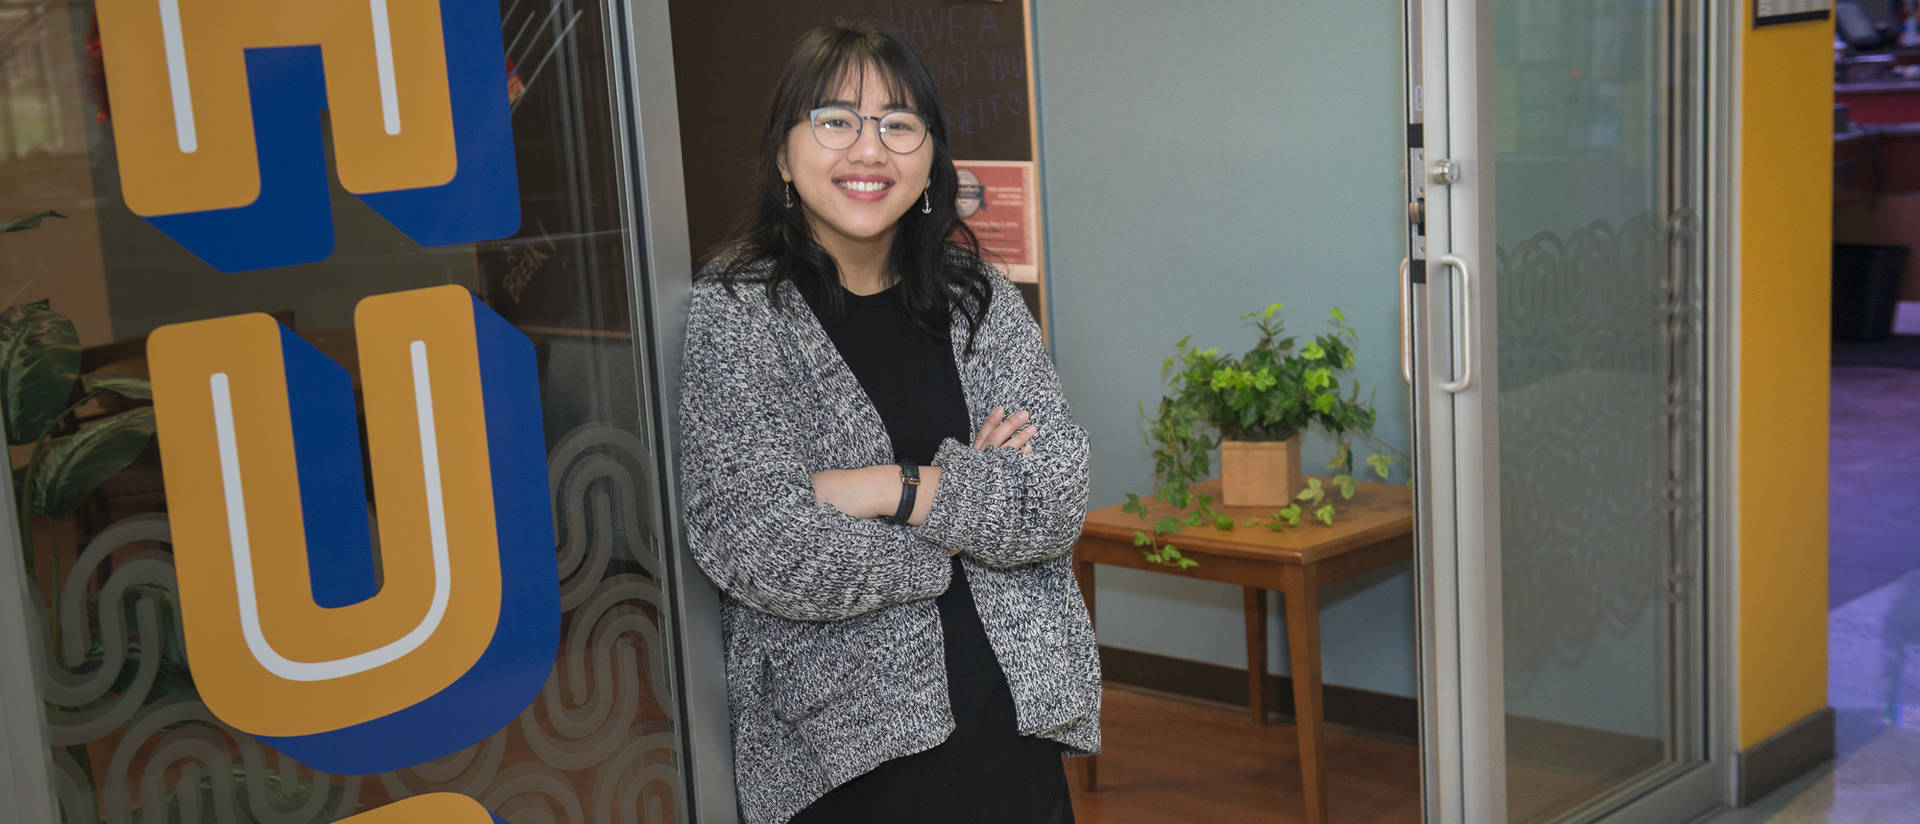 Helping to create the Hub, a space where Blugolds can find student resources, is among Amanda Thao’s accomplishments.